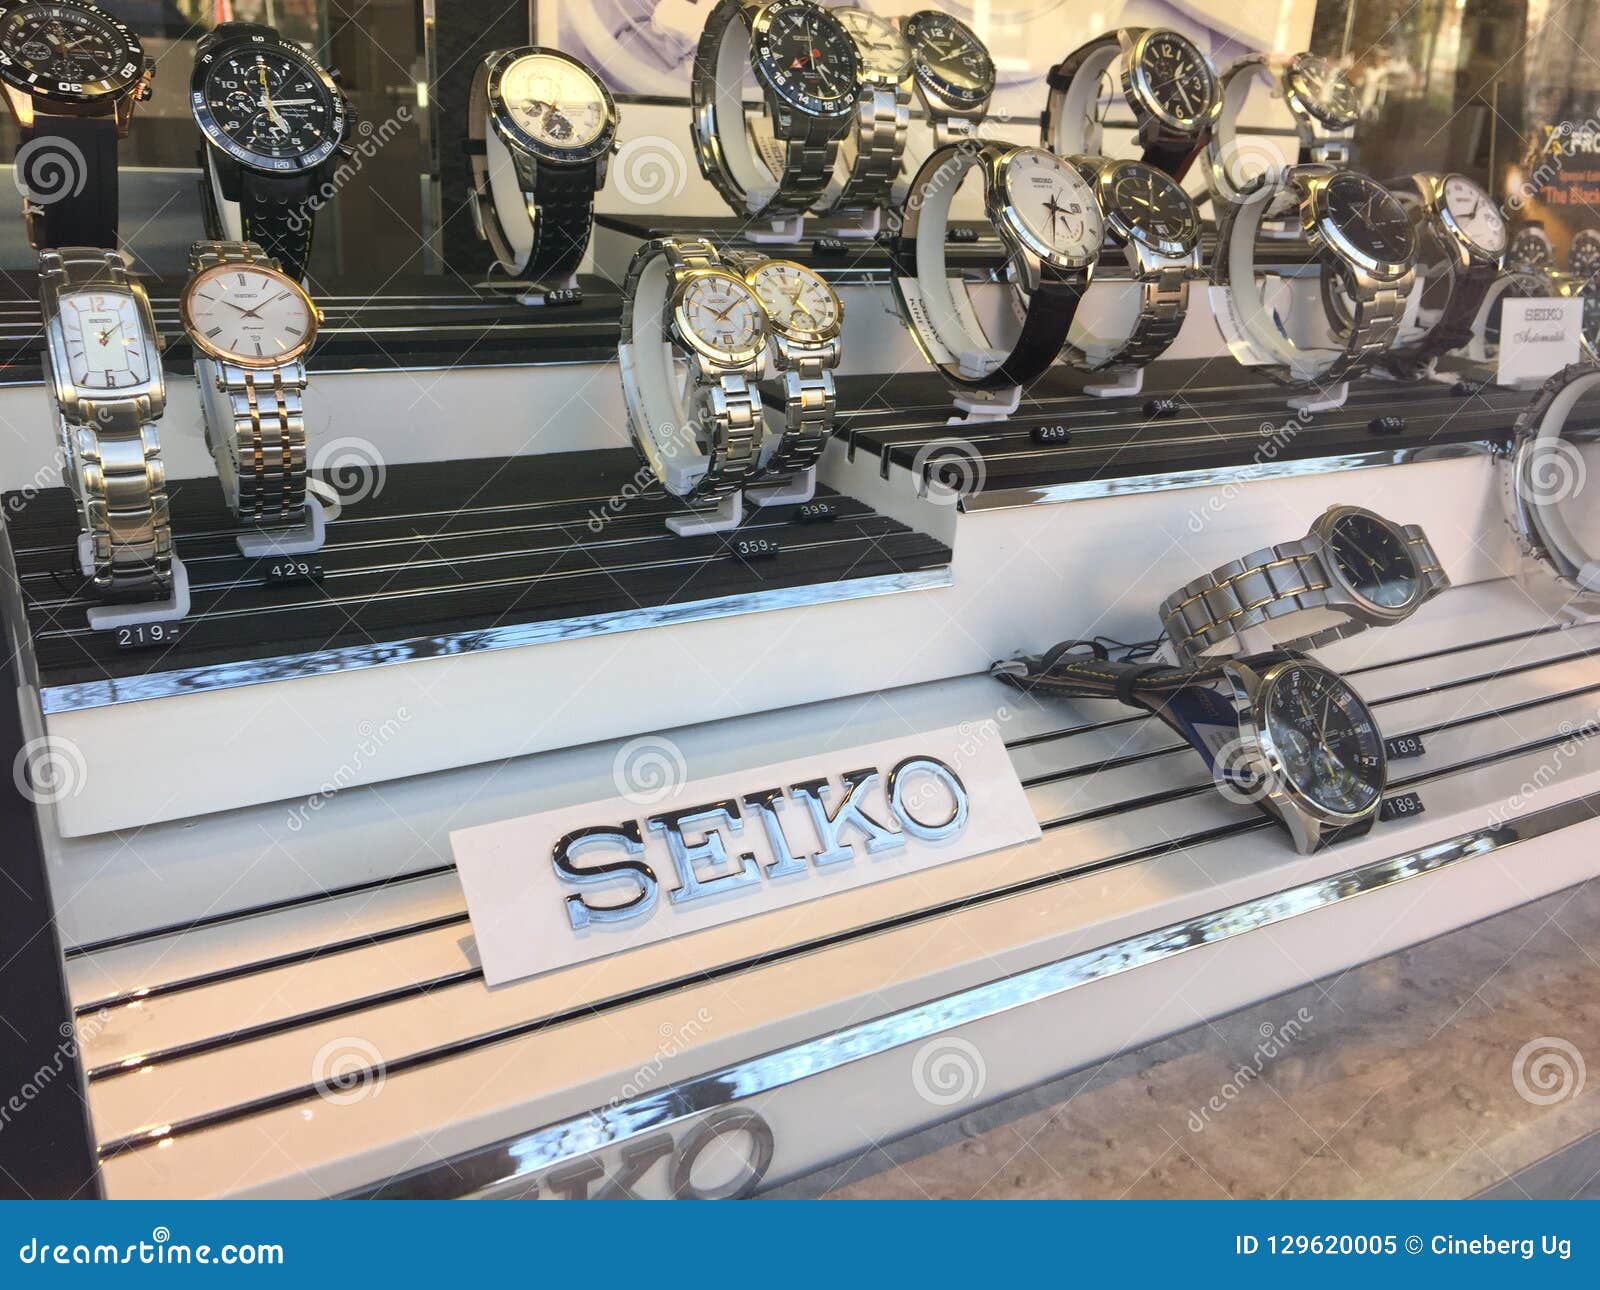 Seiko watches for sale editorial image. Image of chronographs - 129620005